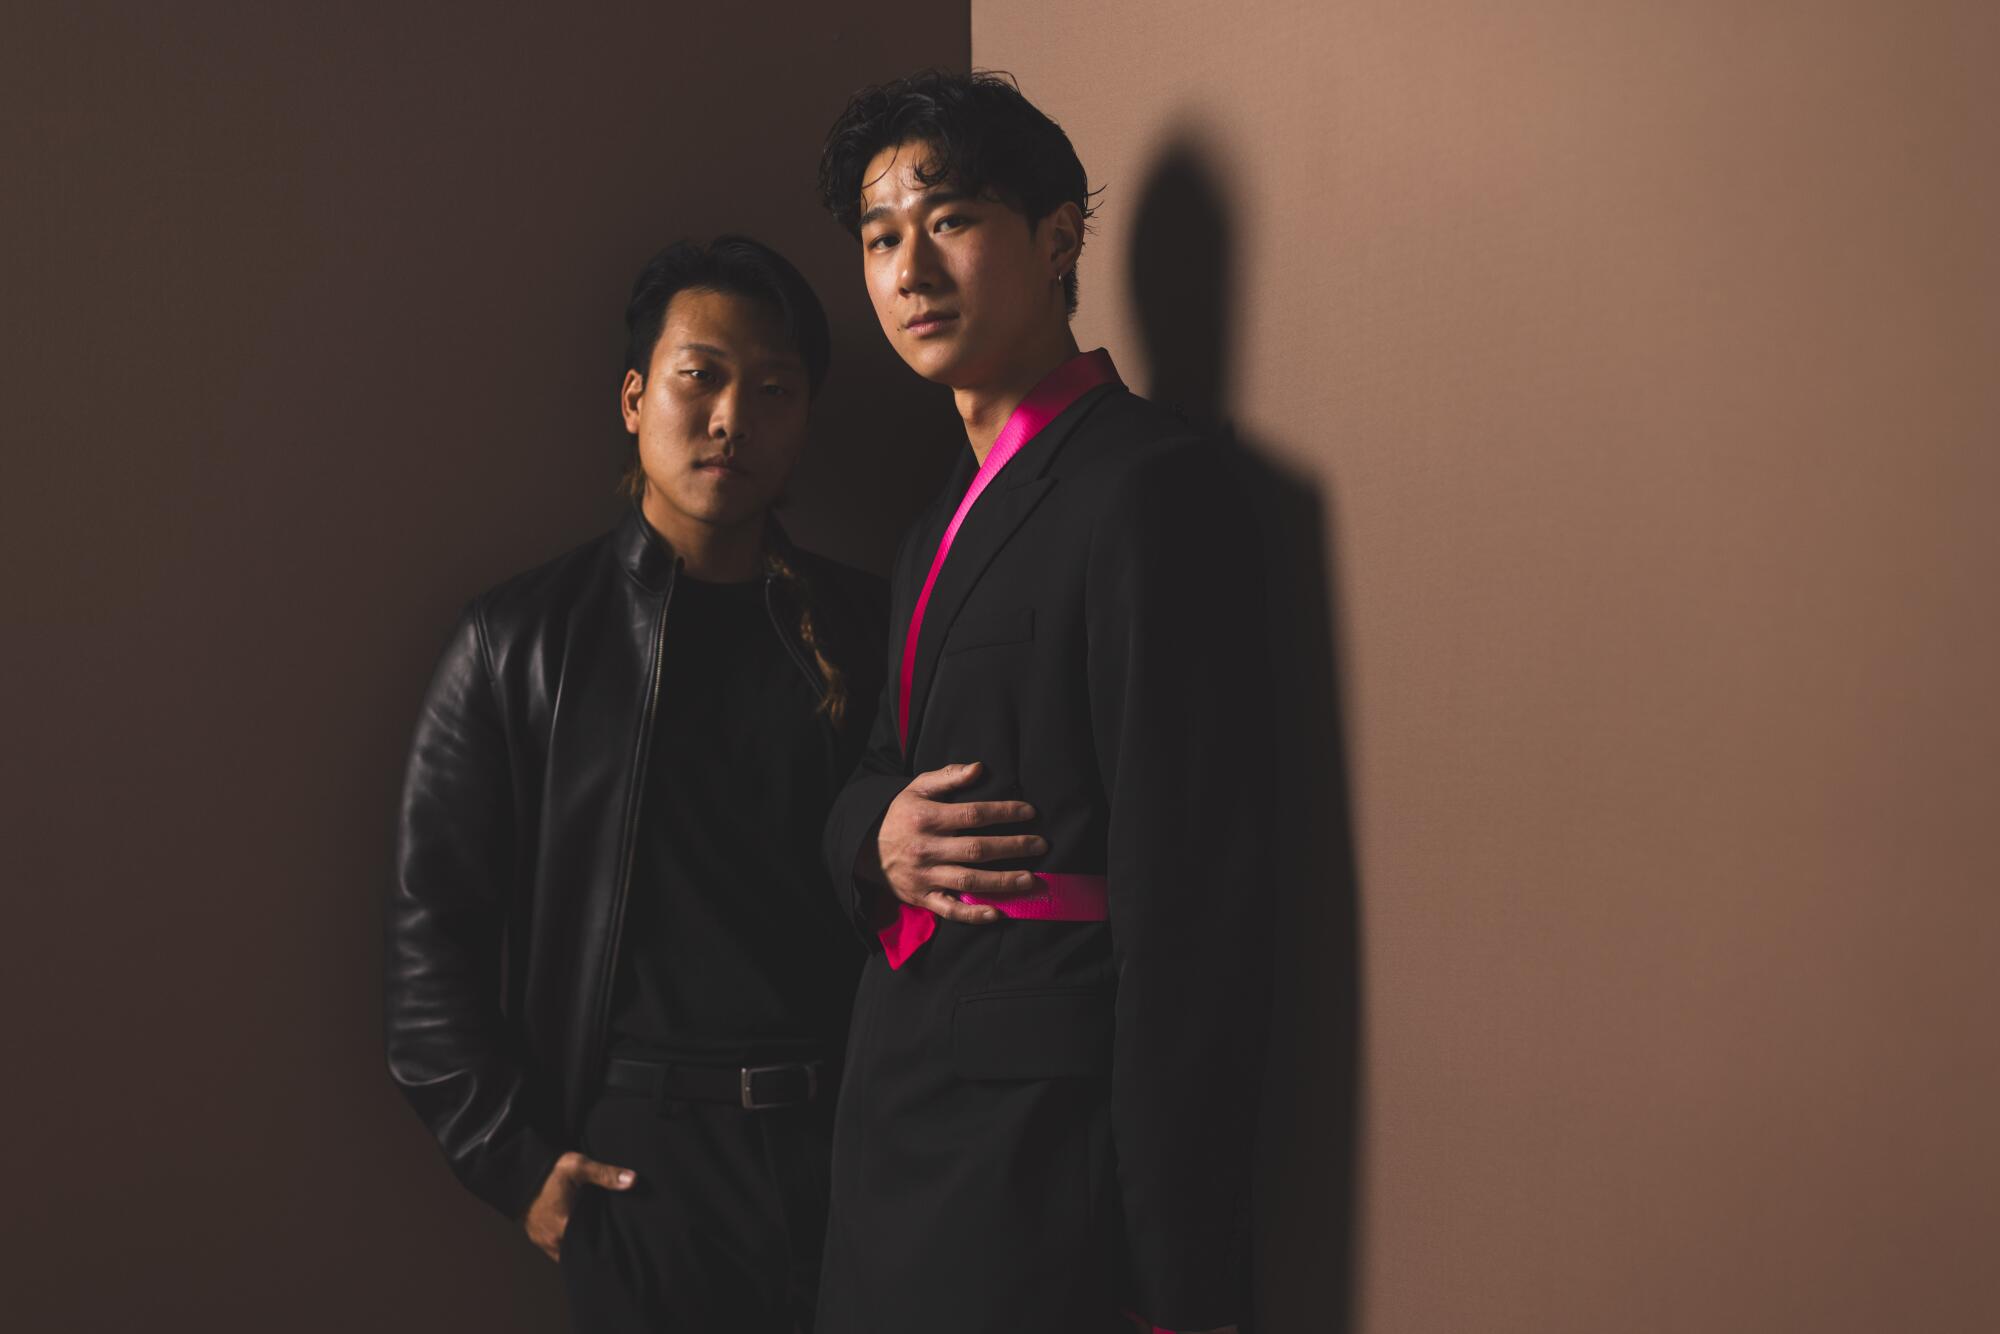 Joon Lee and Sam Song Li stand in a corner next to each other.